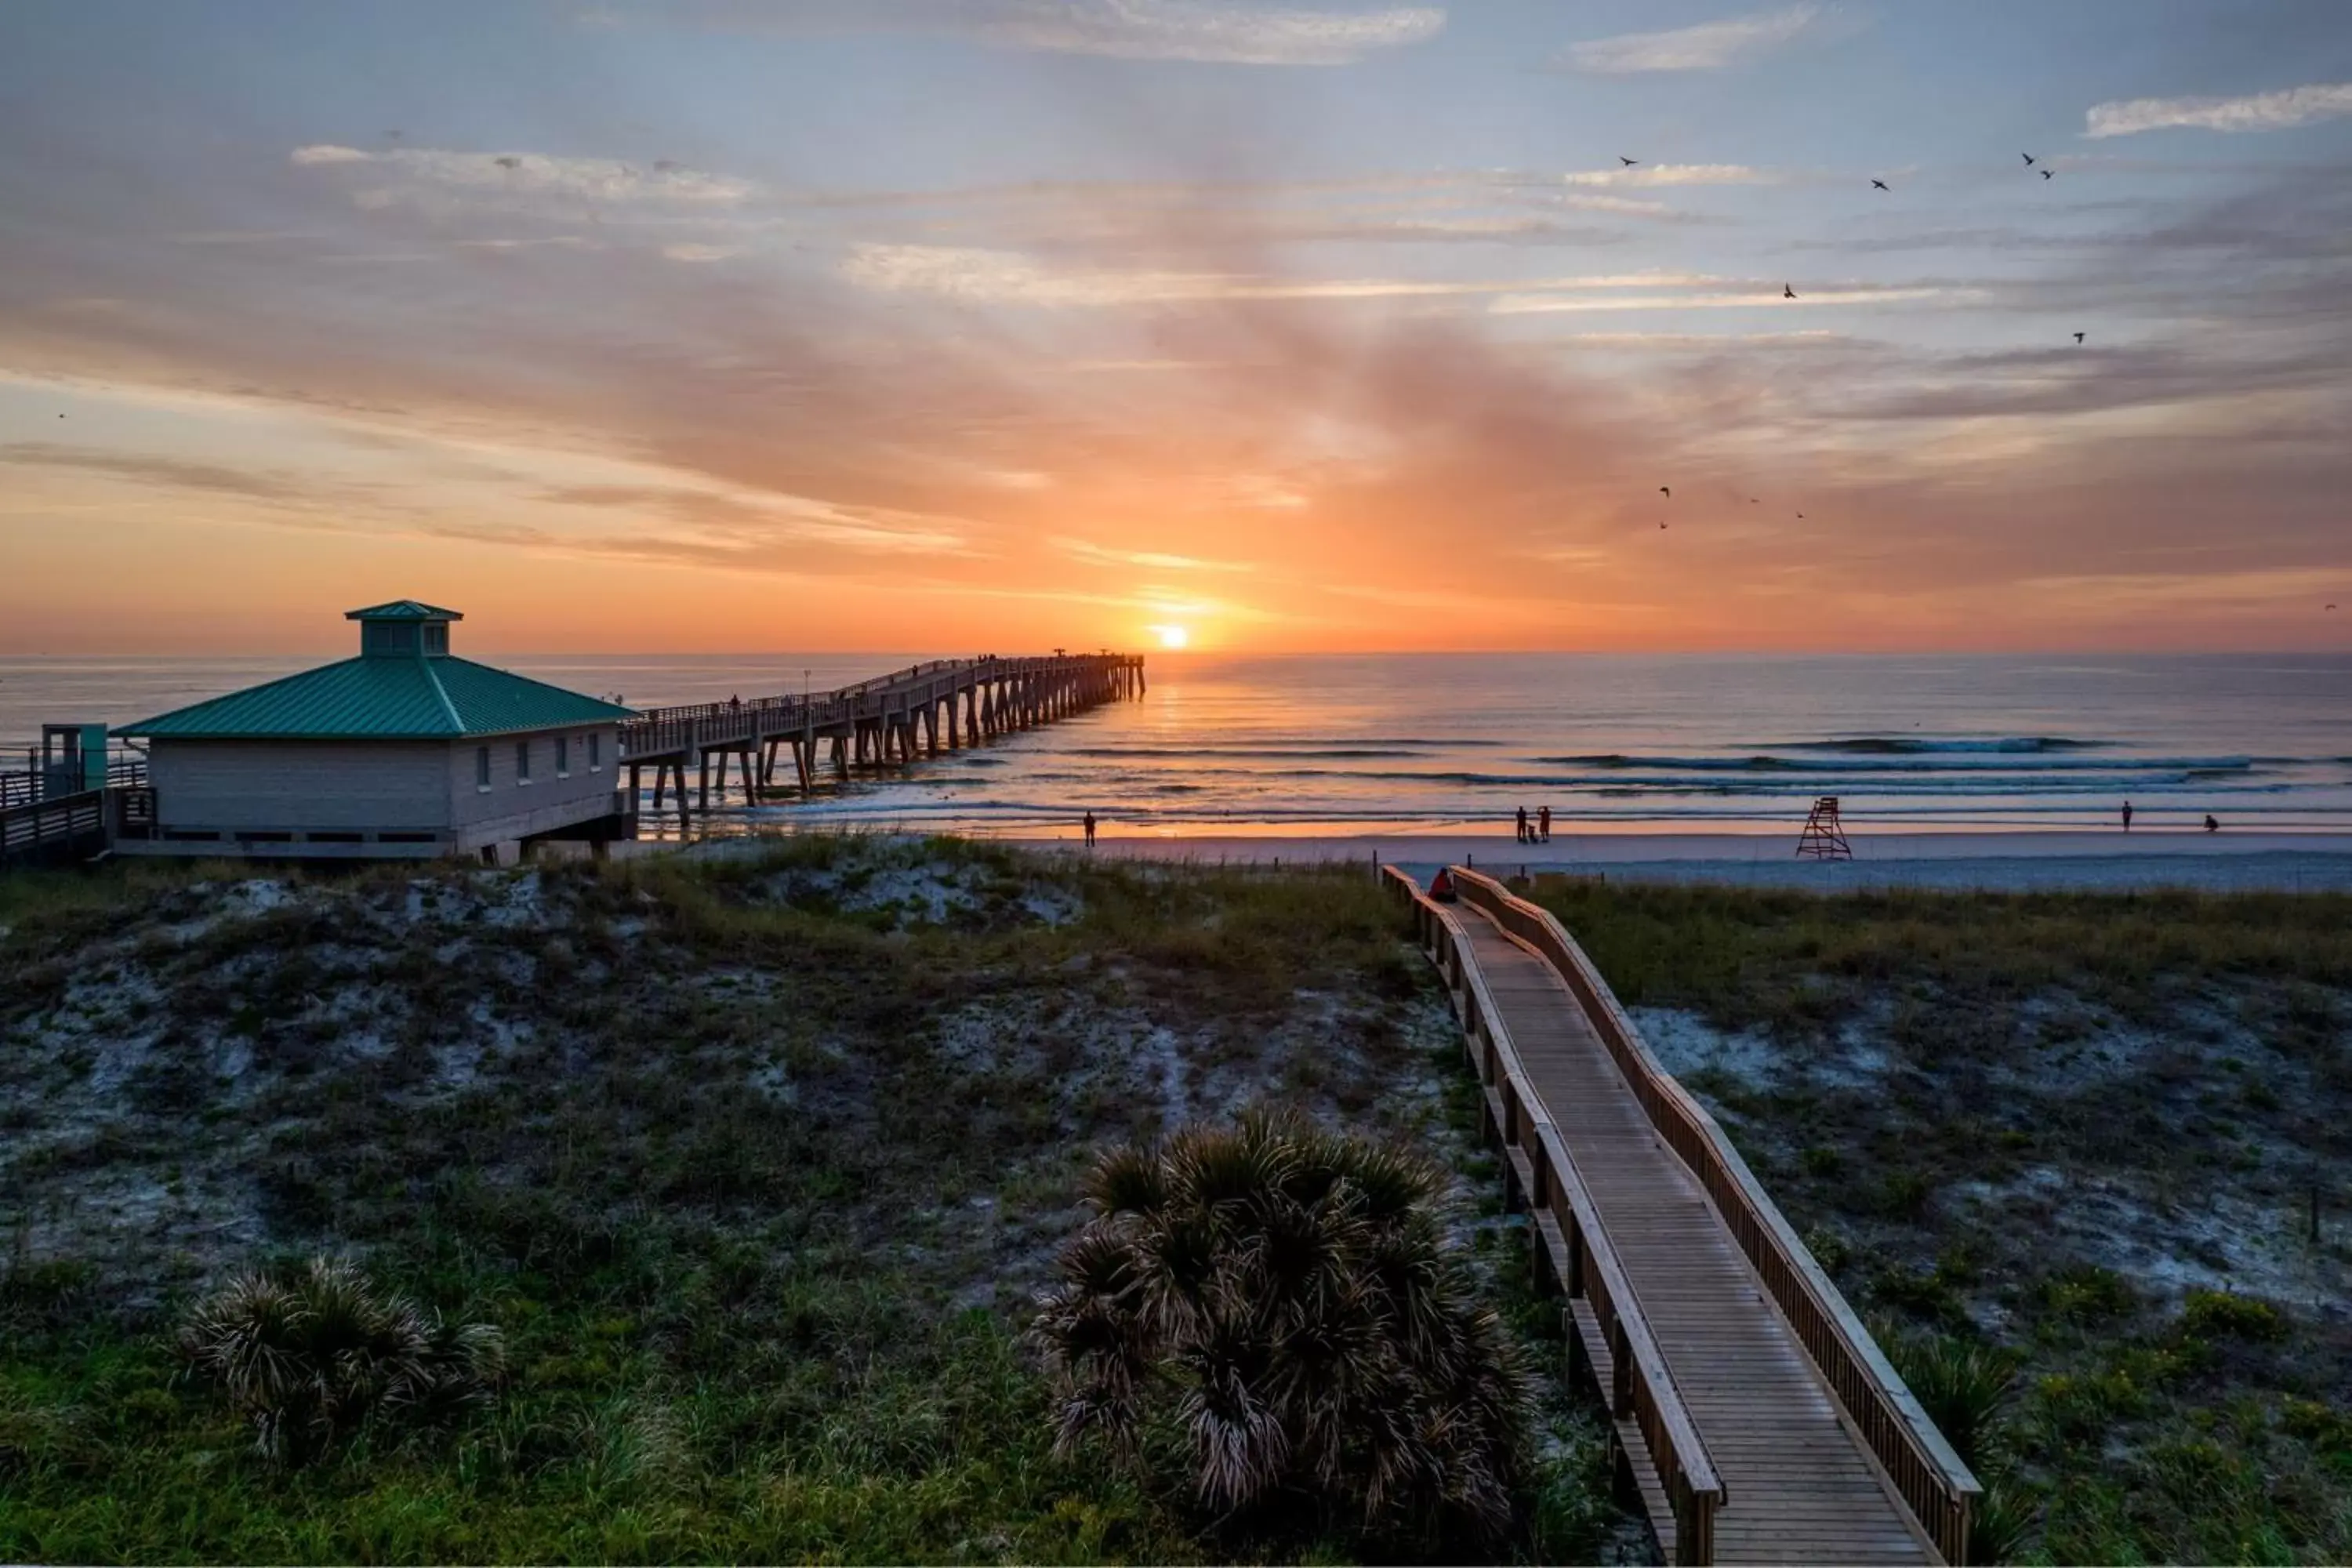 Property building, Sunrise/Sunset in SpringHill Suites by Marriott Jacksonville Beach Oceanfront